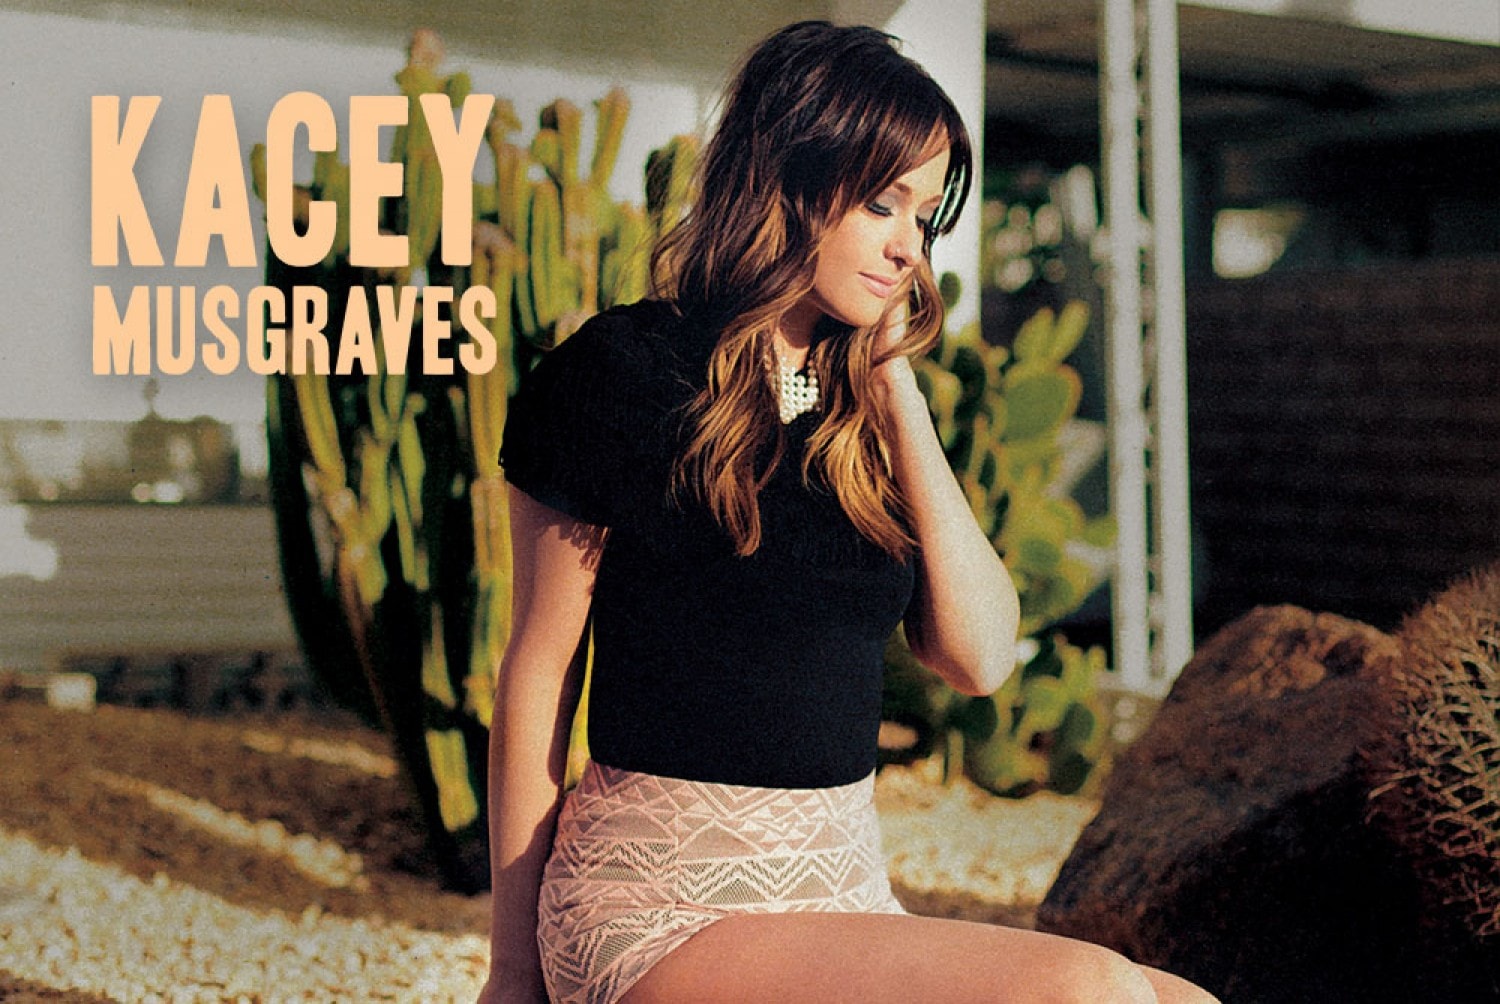 The Hottest Kacey Musgraves Photos.